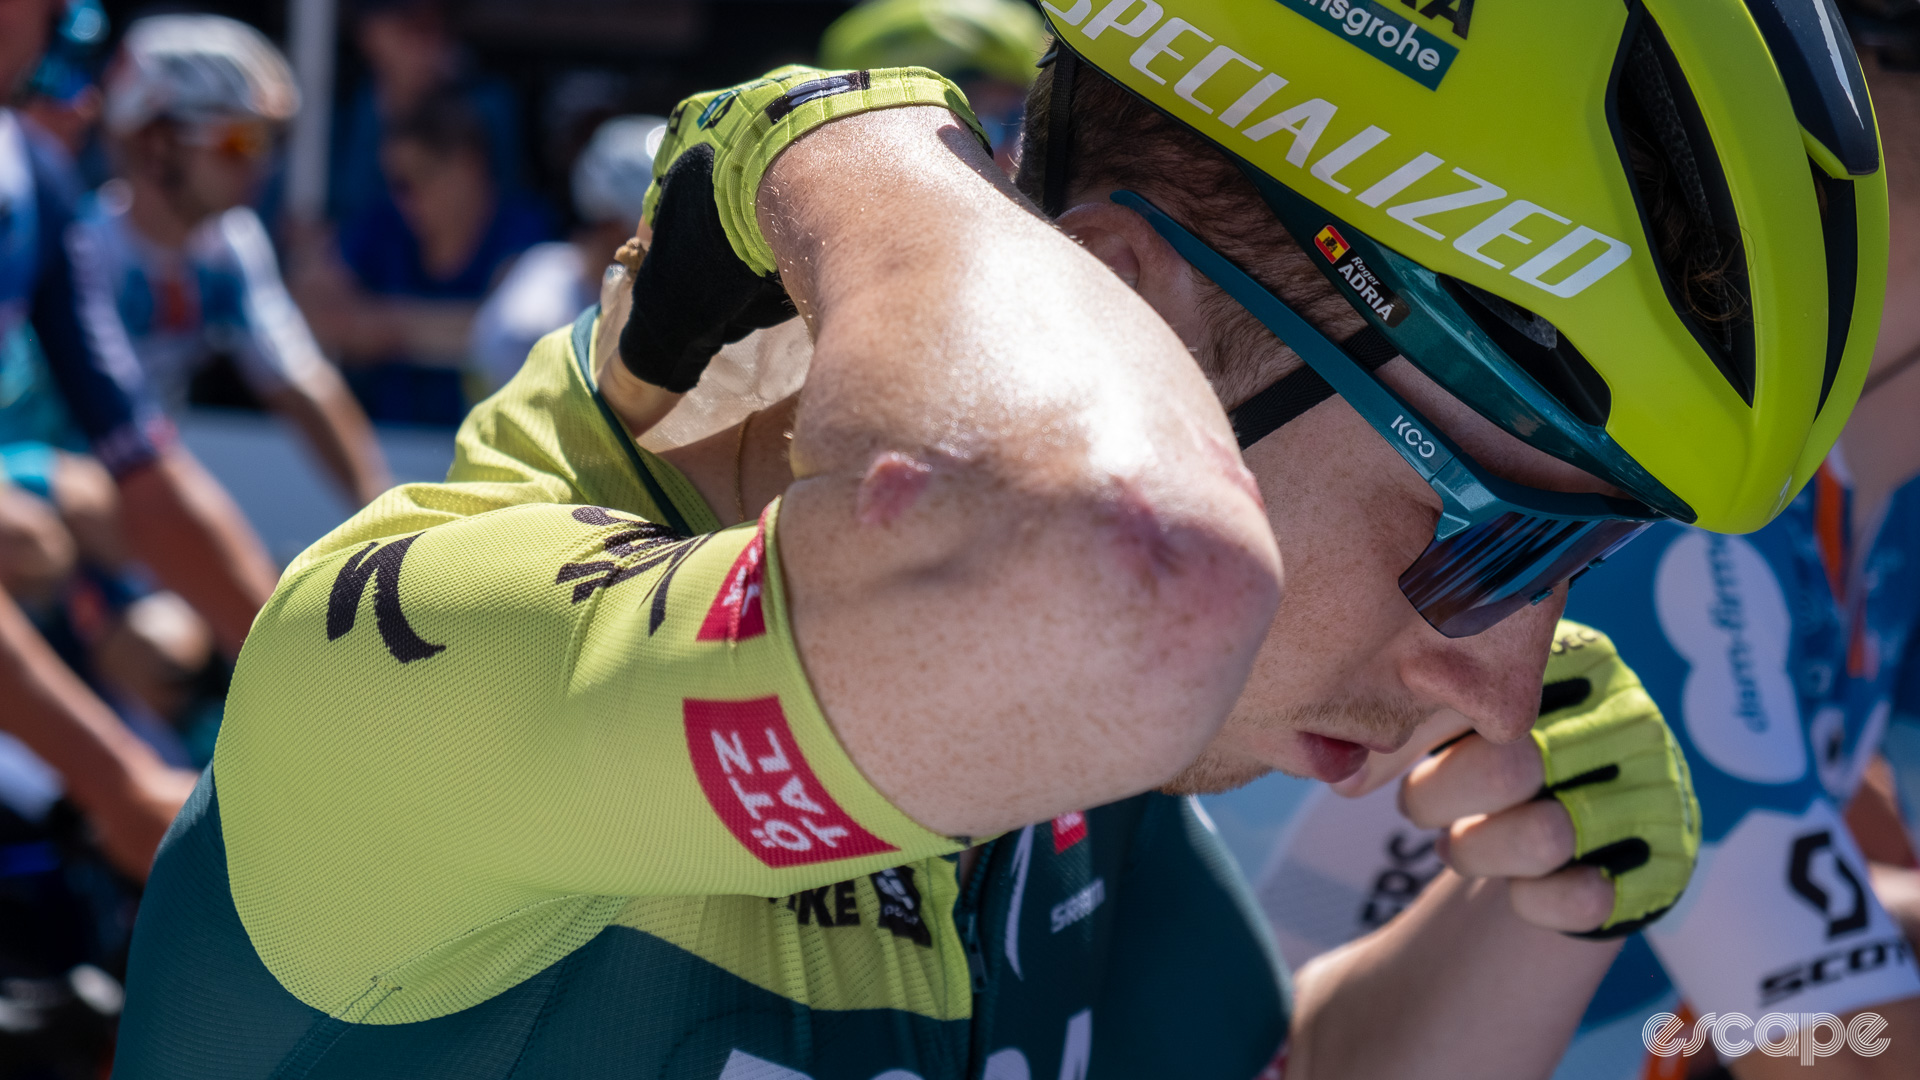 The photo shows a Bora-Hansgrohe rider putting an ice sock inside his jersey onto his neck.